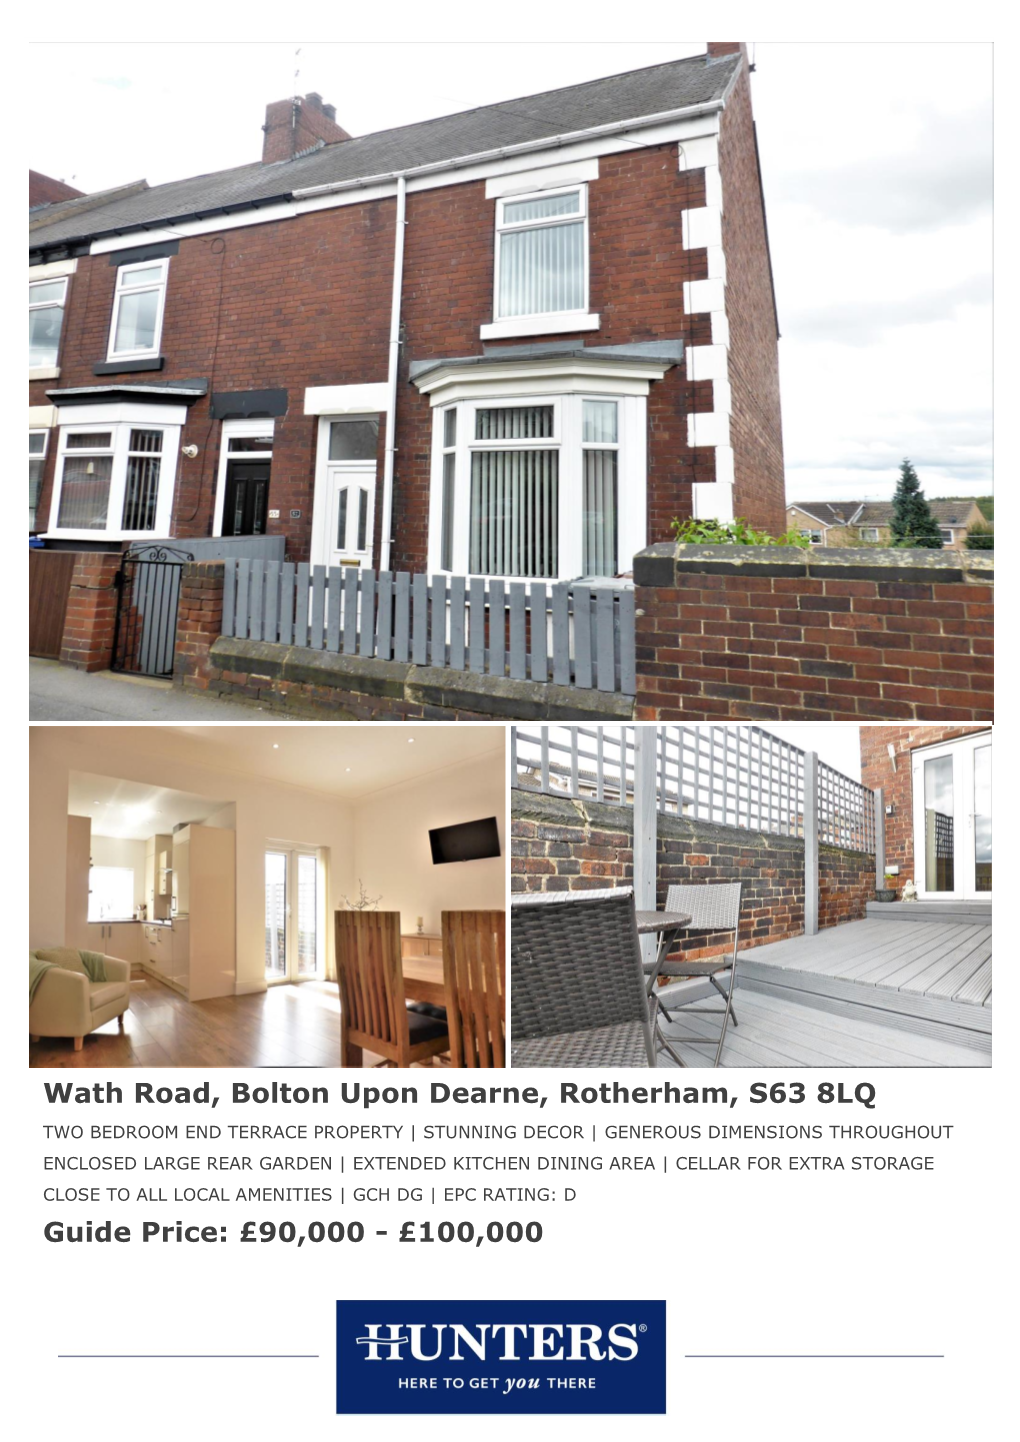 Wath Road, Bolton Upon Dearne, Rotherham, S63 8LQ Guide Price